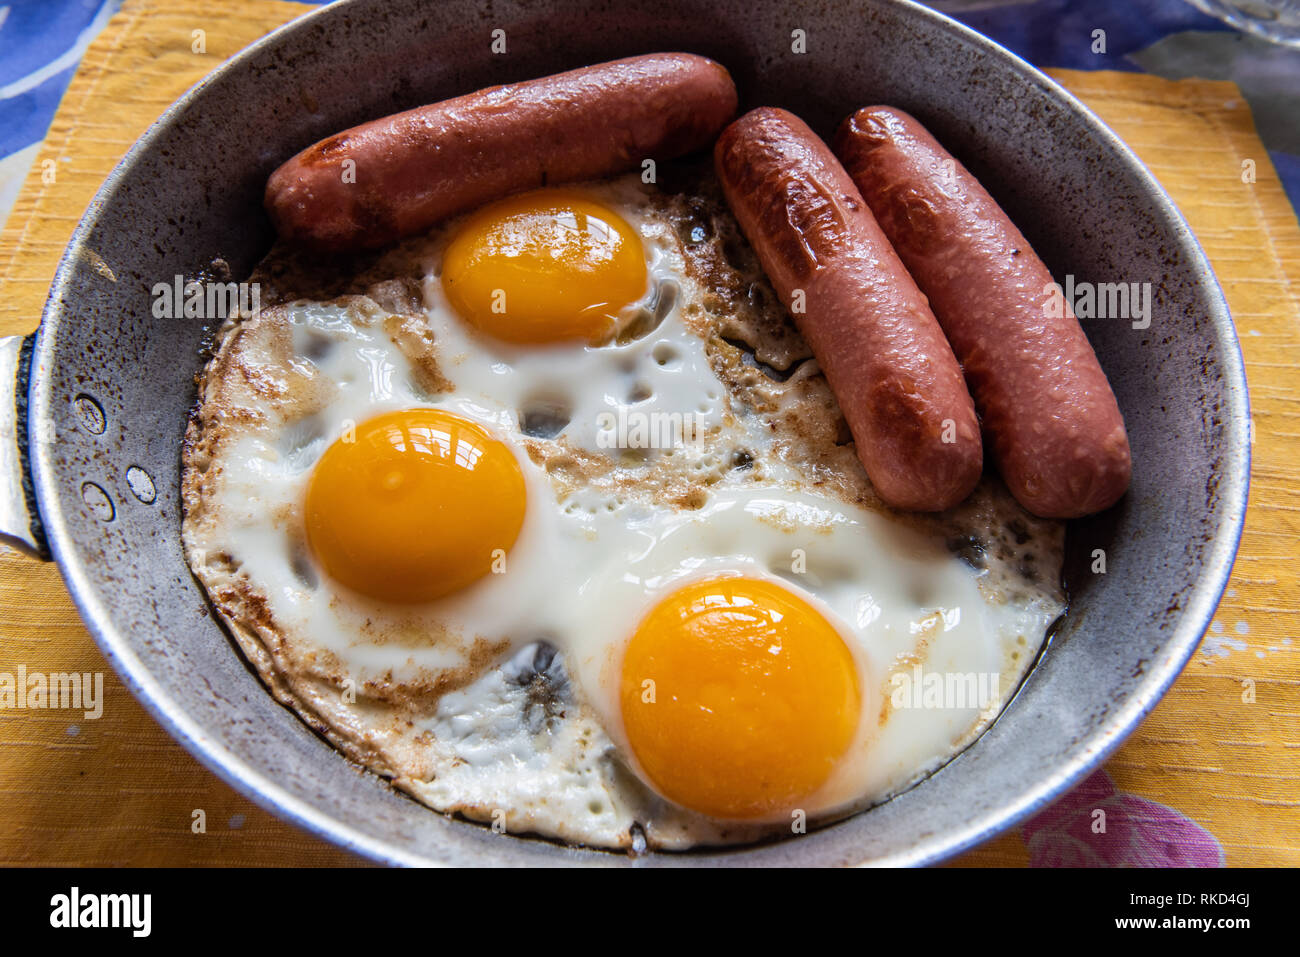 Breakfast meal of three sausages and fried eggs. Stock Photo